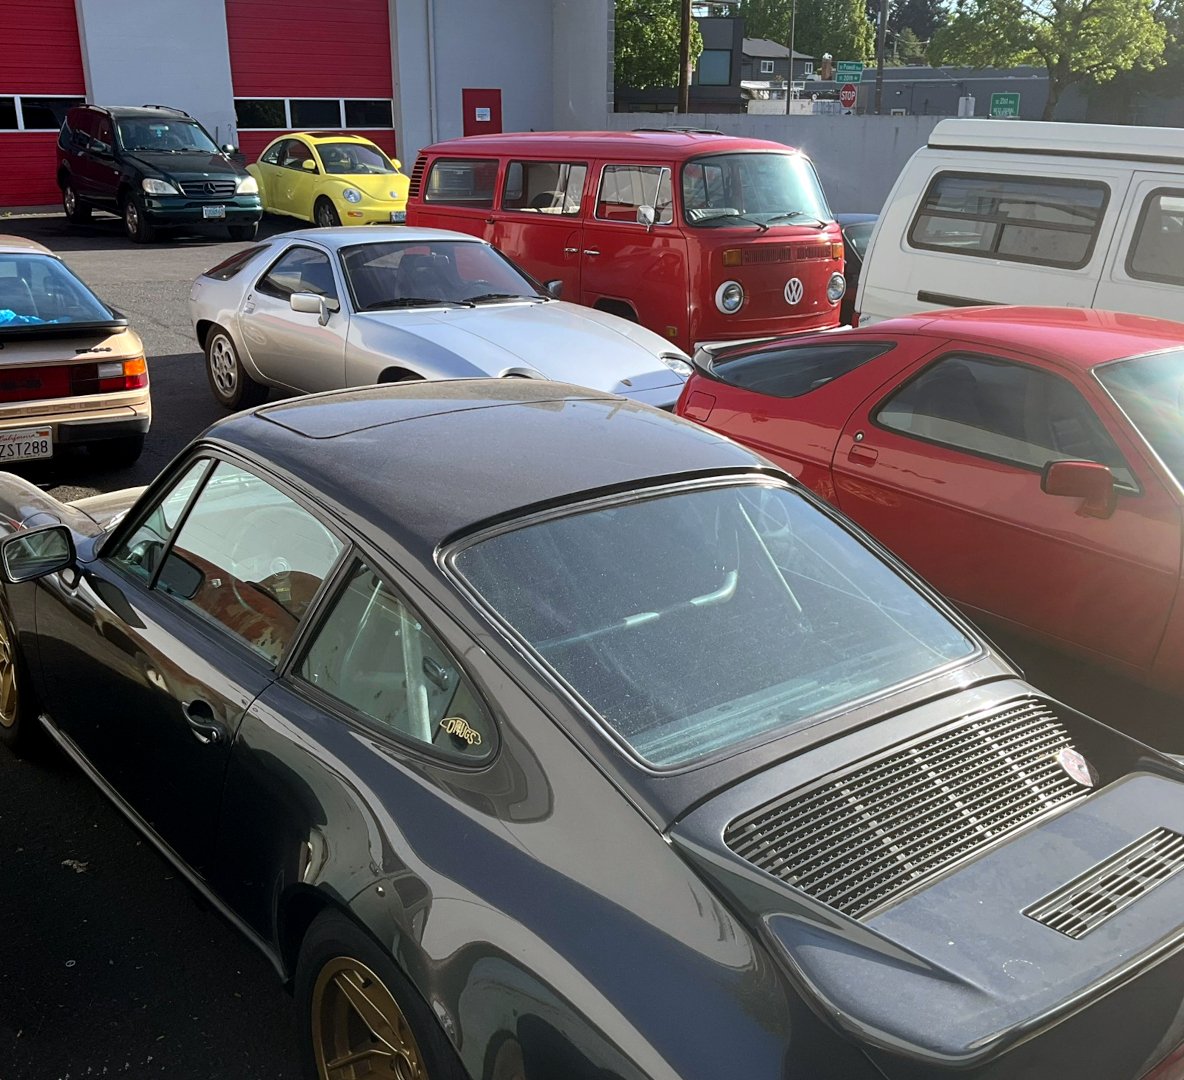 The sun is shining, the parking lot is filling, and so is our service calendar.  If you need automotive work performed in preparation for summer adventures now is the time to schedule it.

#heckmannthiemann #autoservice #autorepair #portland #porsche #volkswagen #bmw #mercedes